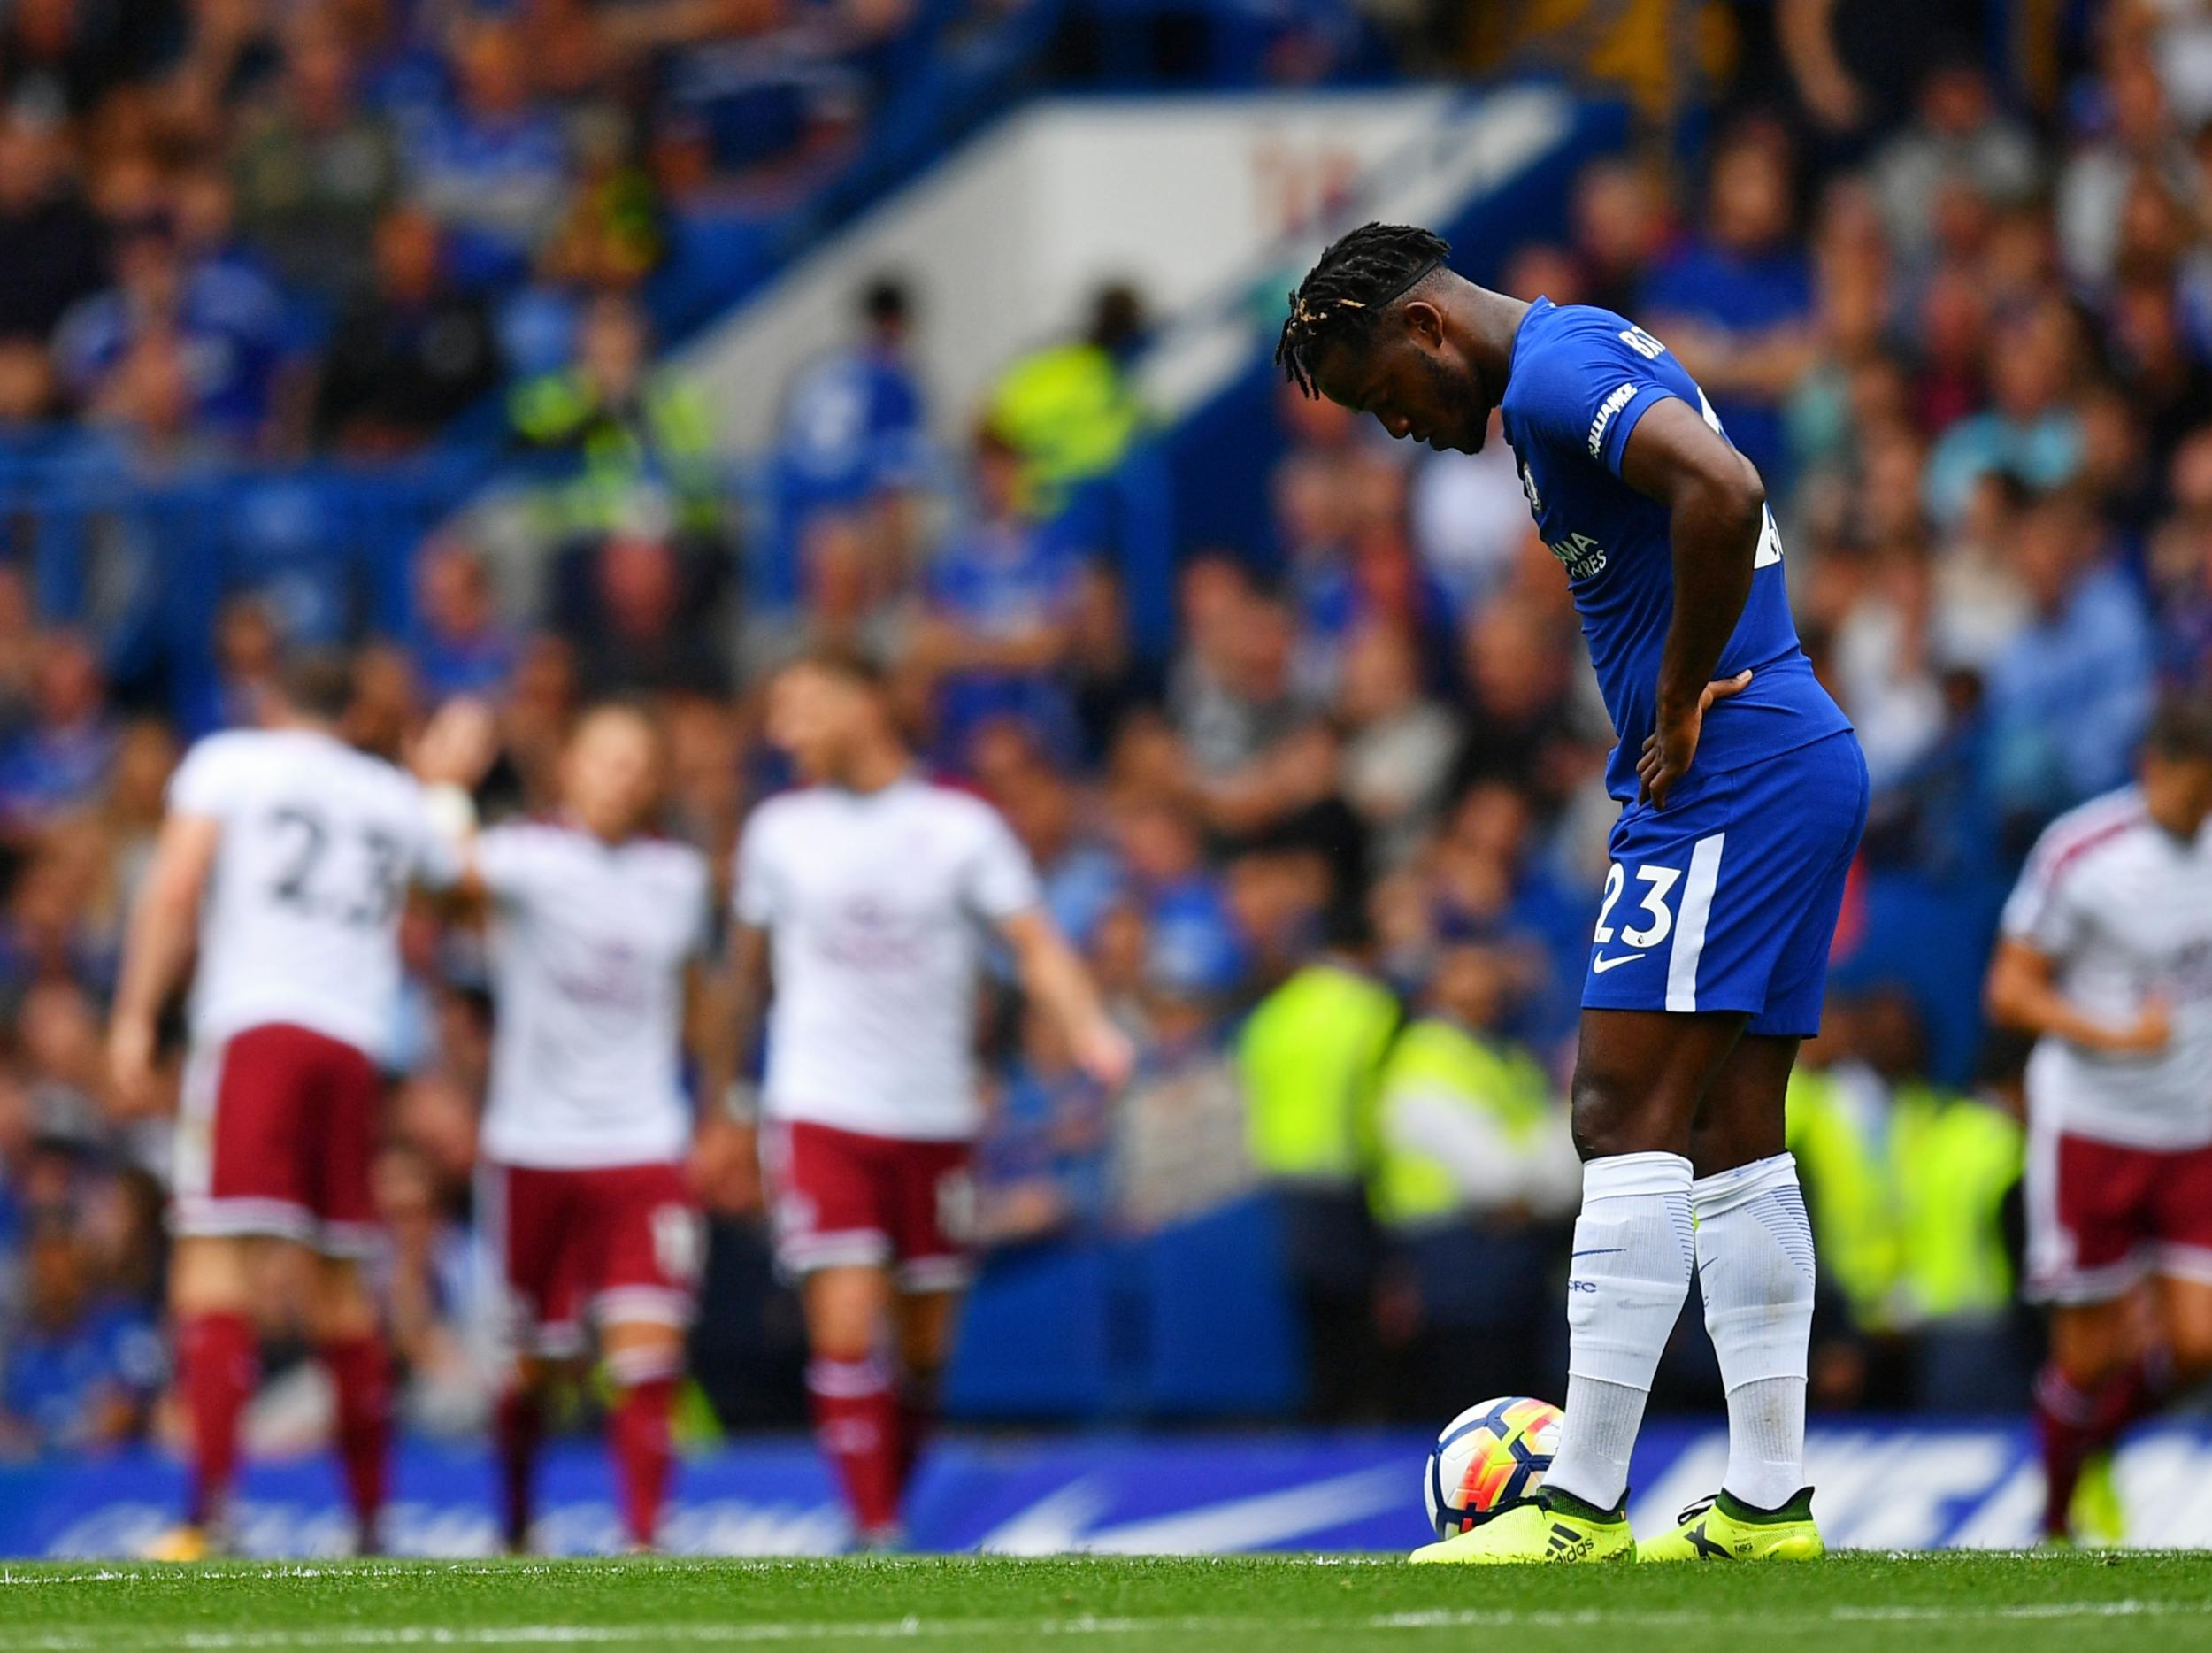 Chelsea's shock loss will have set the alarm bells ringing